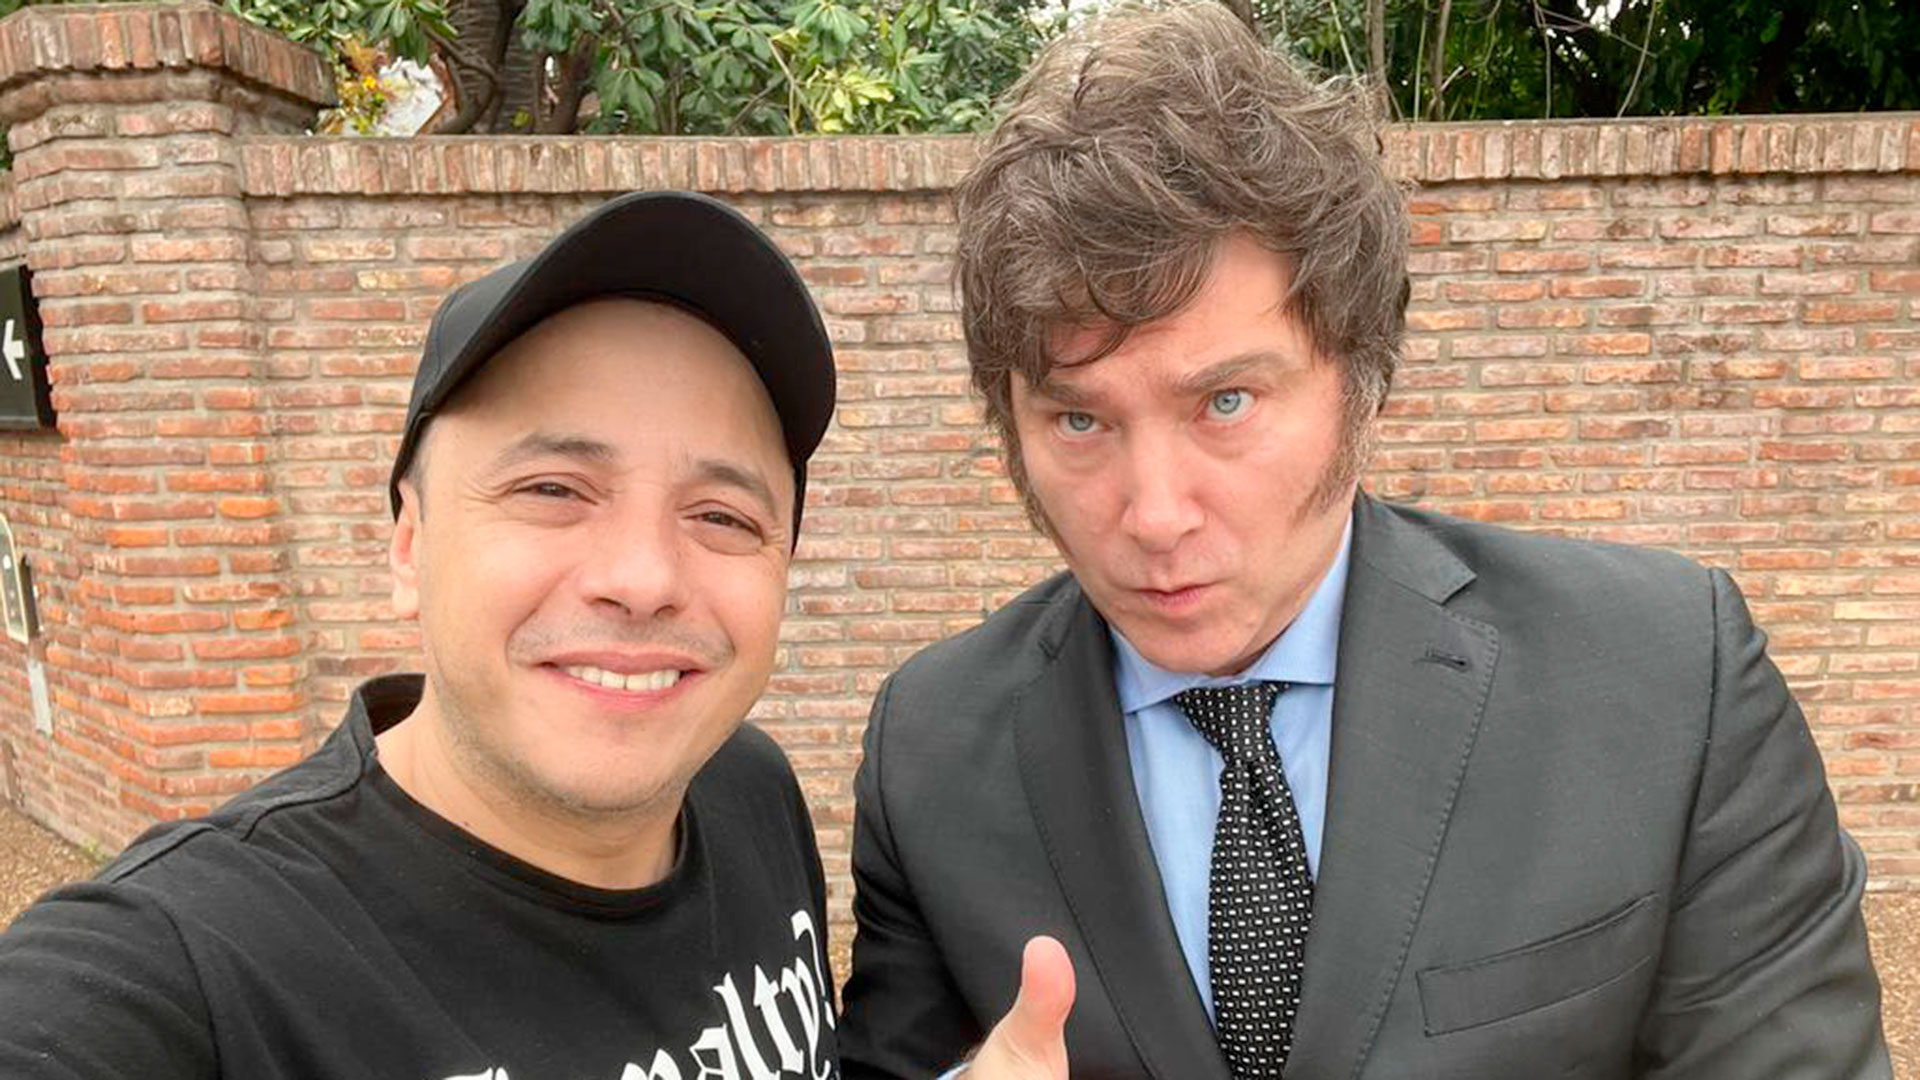 El Dipy and Javier Milei pose for the photo with which they announced their electoral agreement